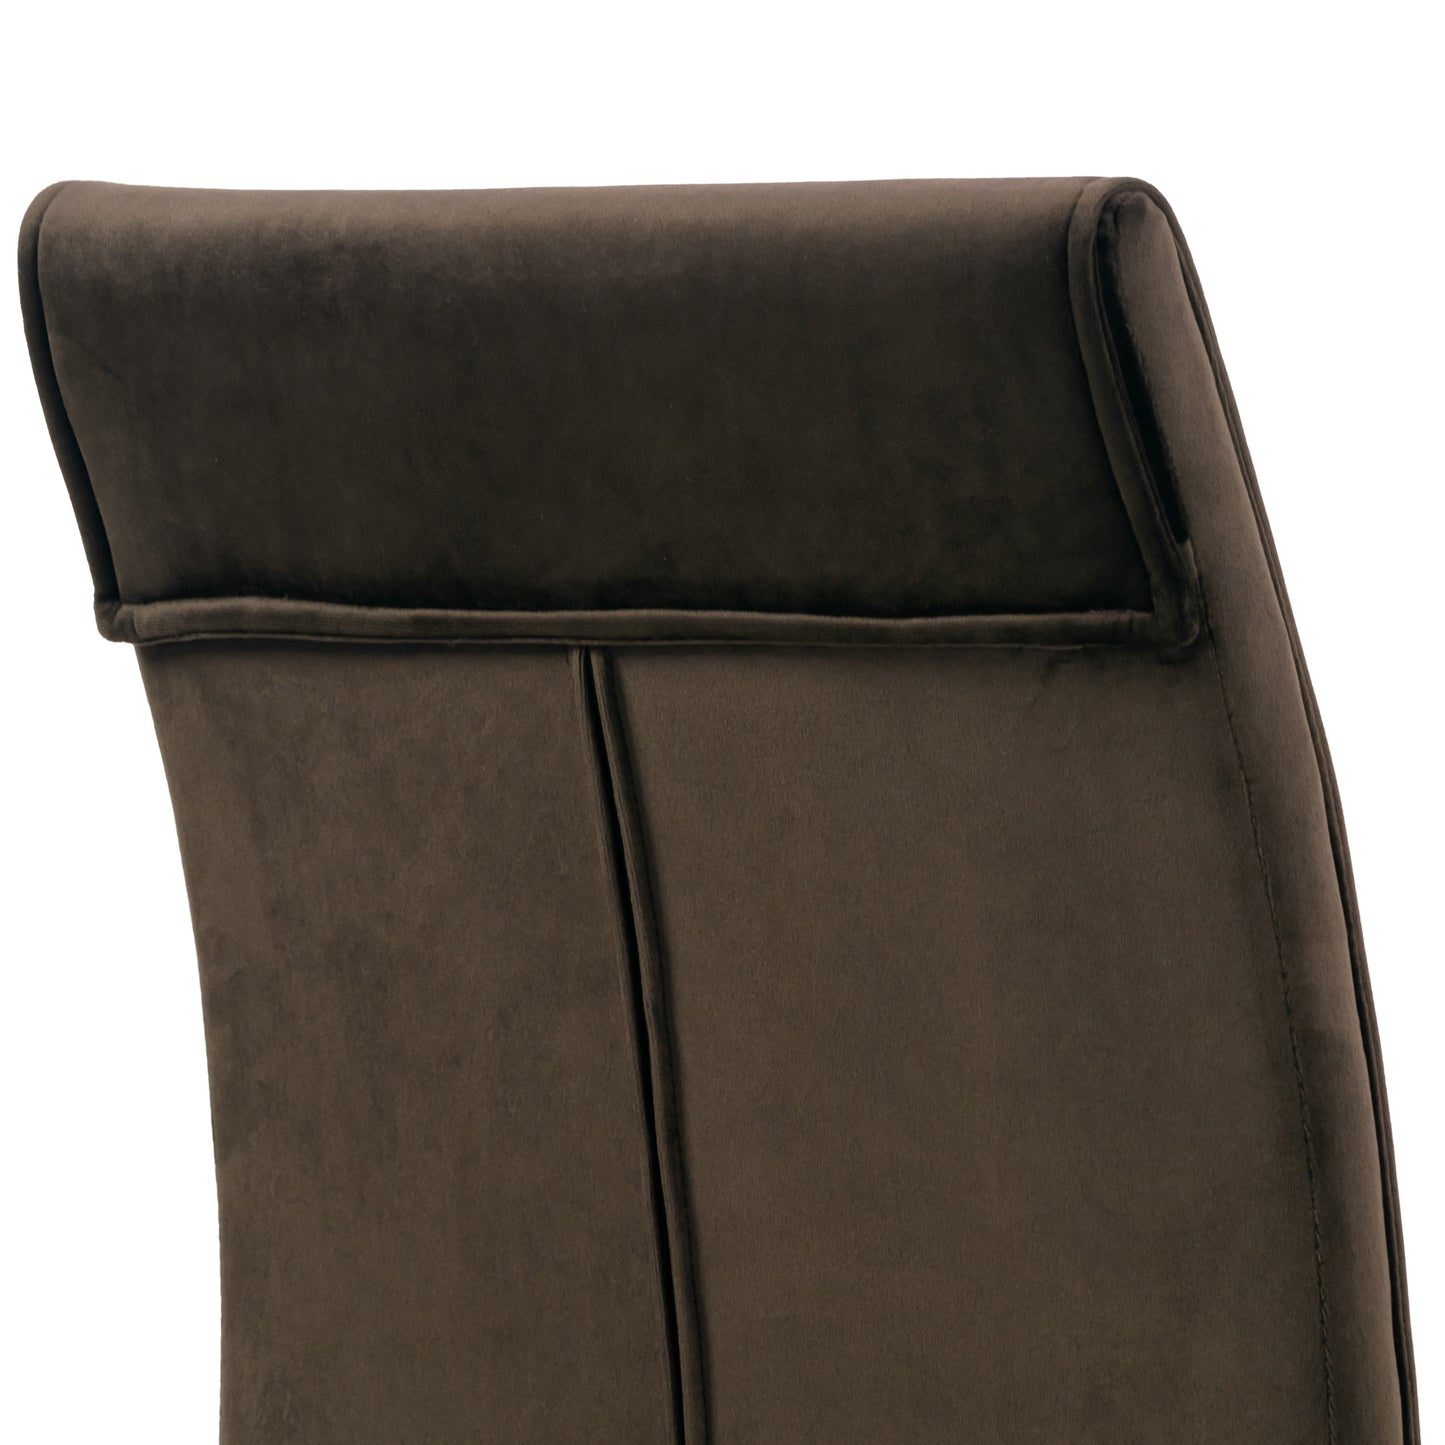 Set of 2 Areli Brown Velvet Dining Chair with Upholstered Legs